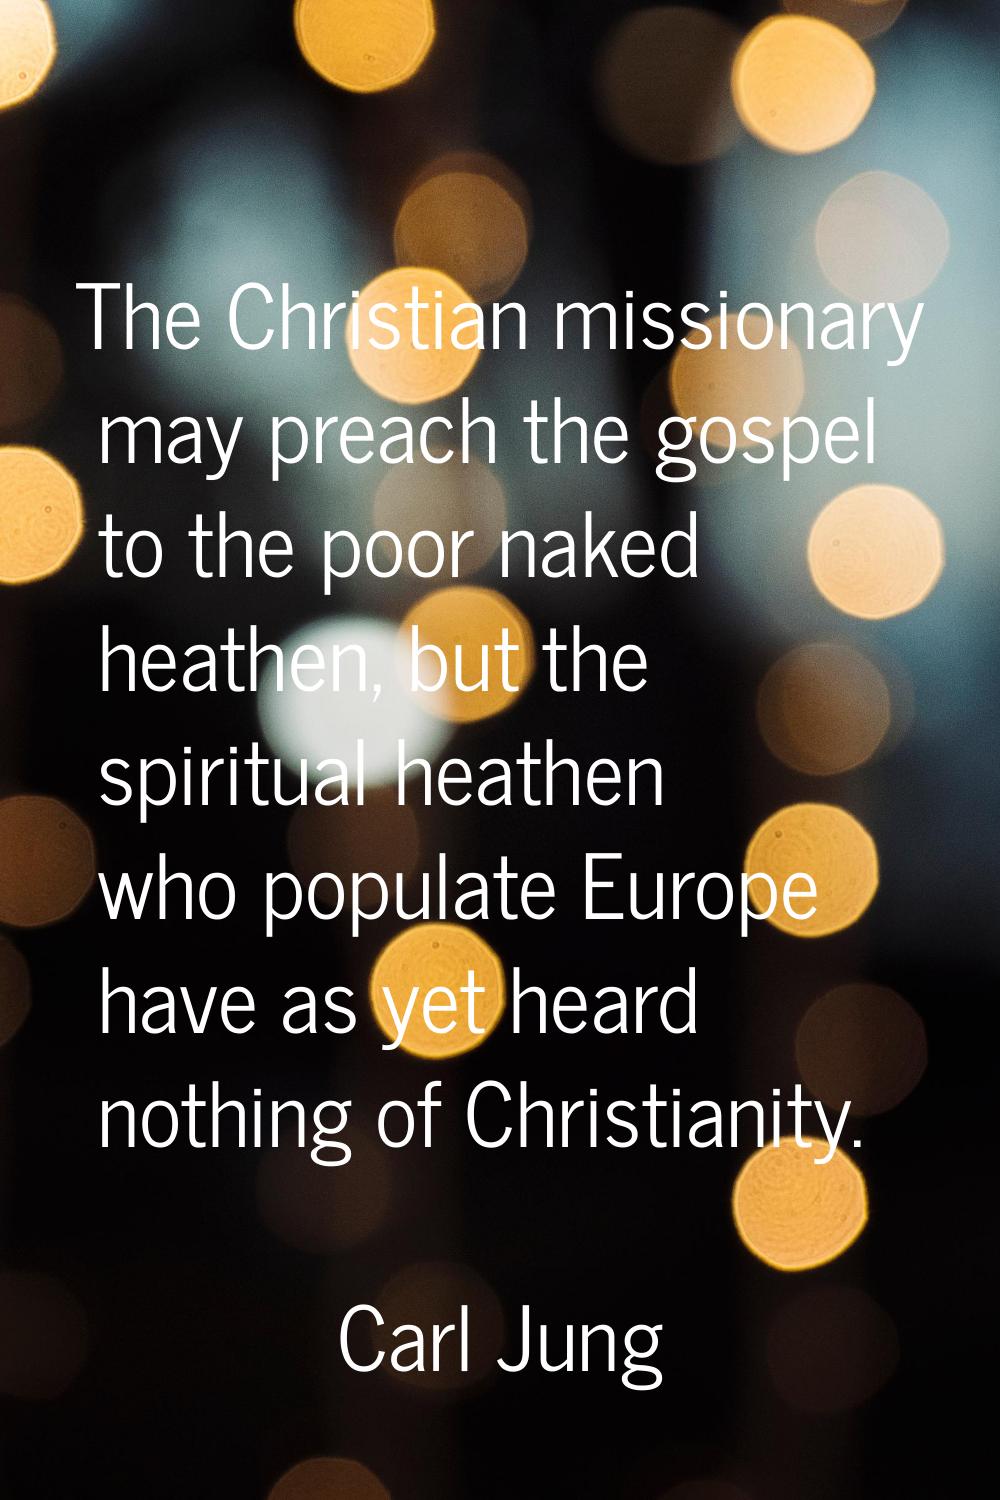 The Christian missionary may preach the gospel to the poor naked heathen, but the spiritual heathen